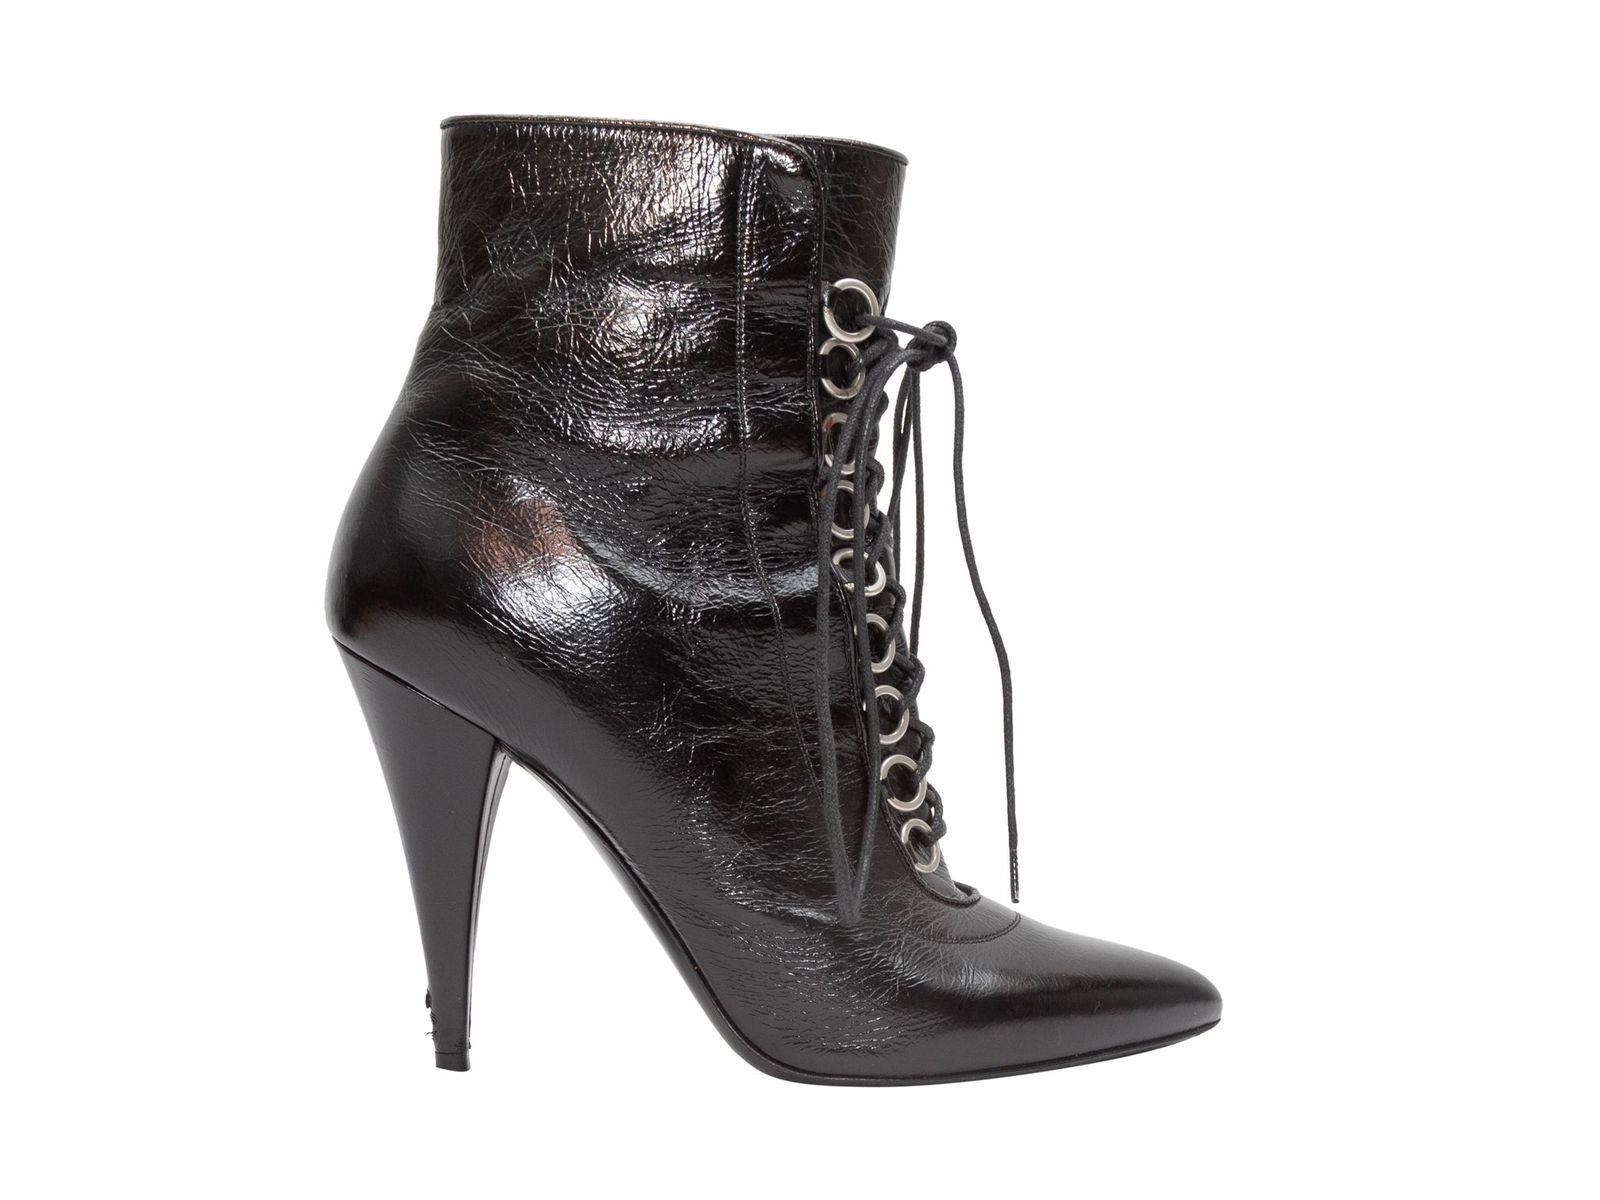 Saint Laurent Black Pointed-Toe Heeled Ankle Boots 2